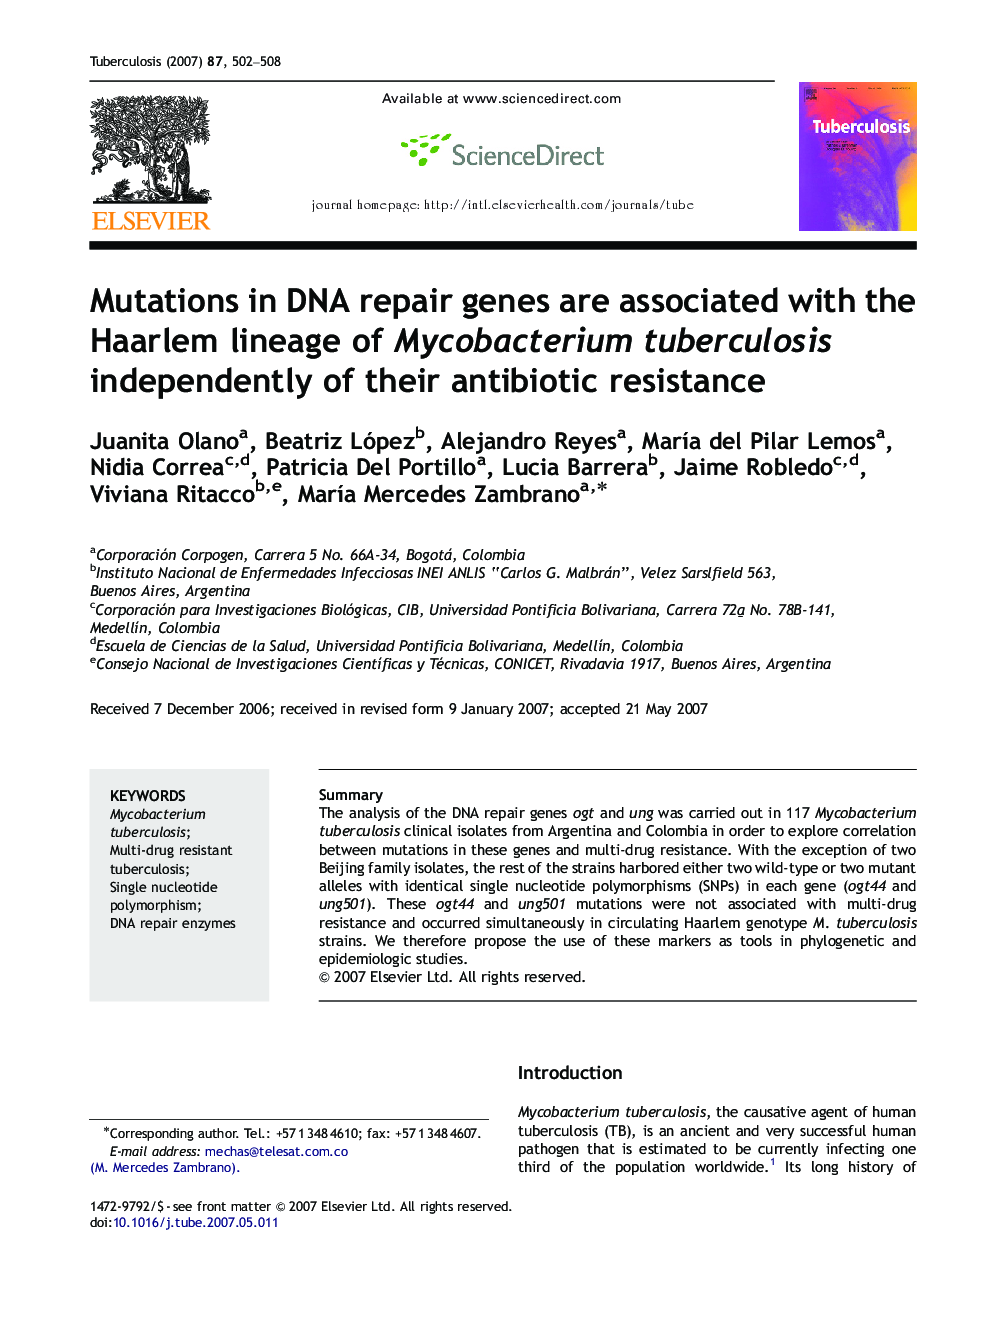 Mutations in DNA repair genes are associated with the Haarlem lineage of Mycobacterium tuberculosis independently of their antibiotic resistance